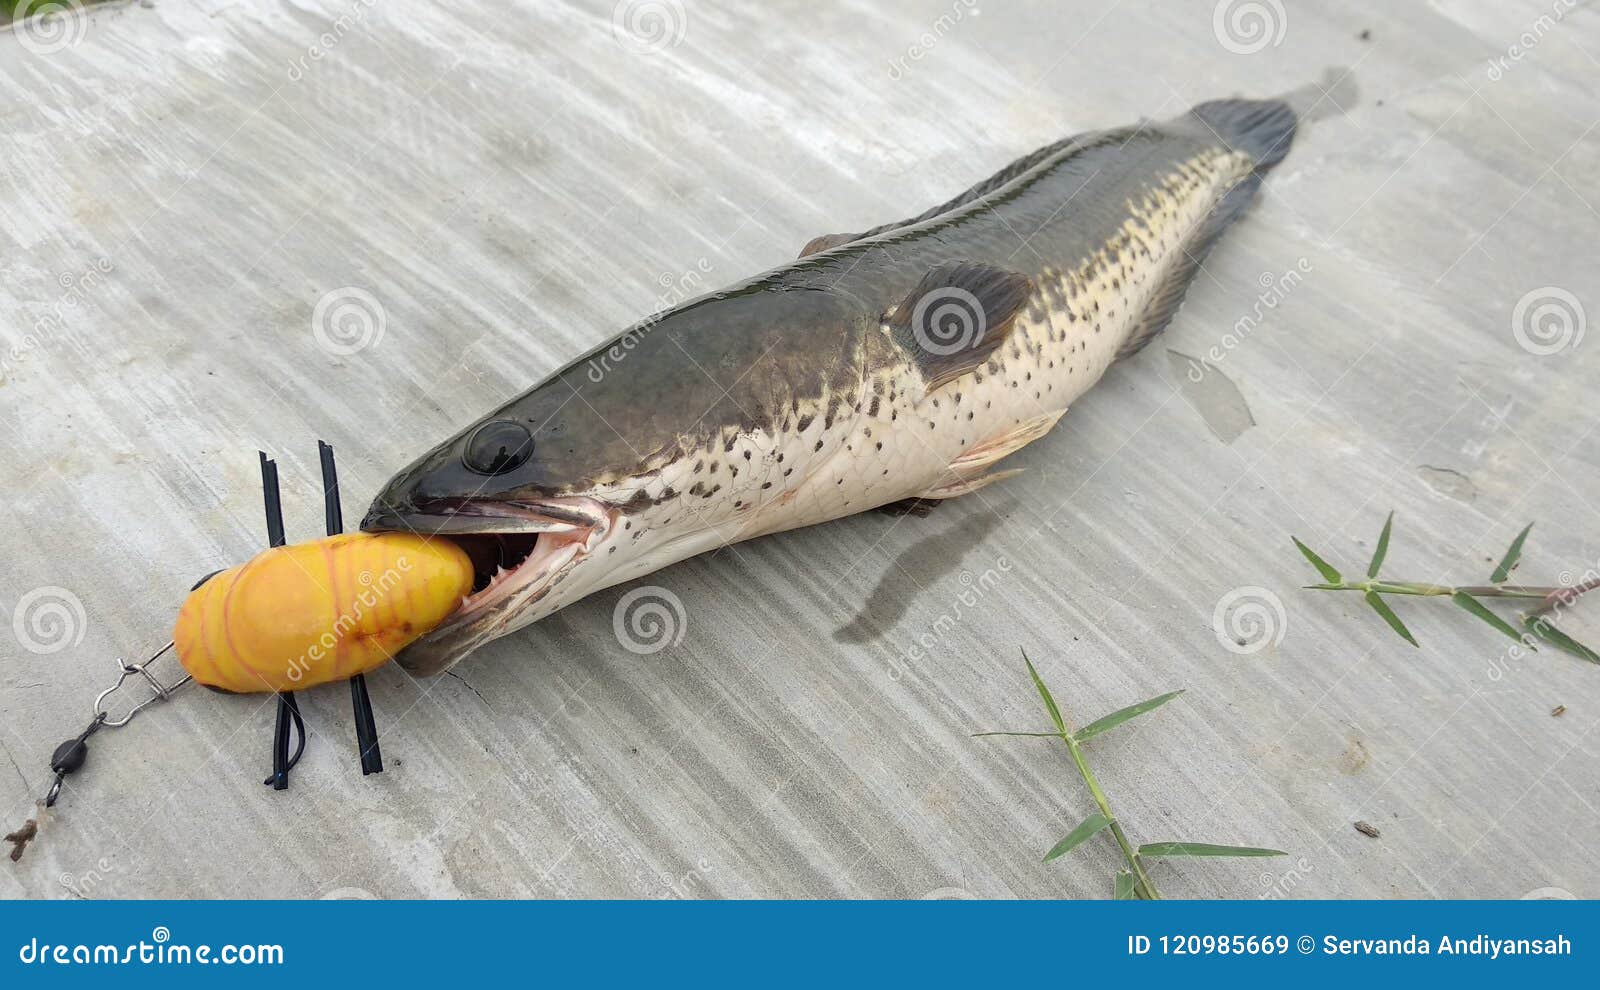 Snakehead fishing stock image. Image of used, body, hollow - 120985669